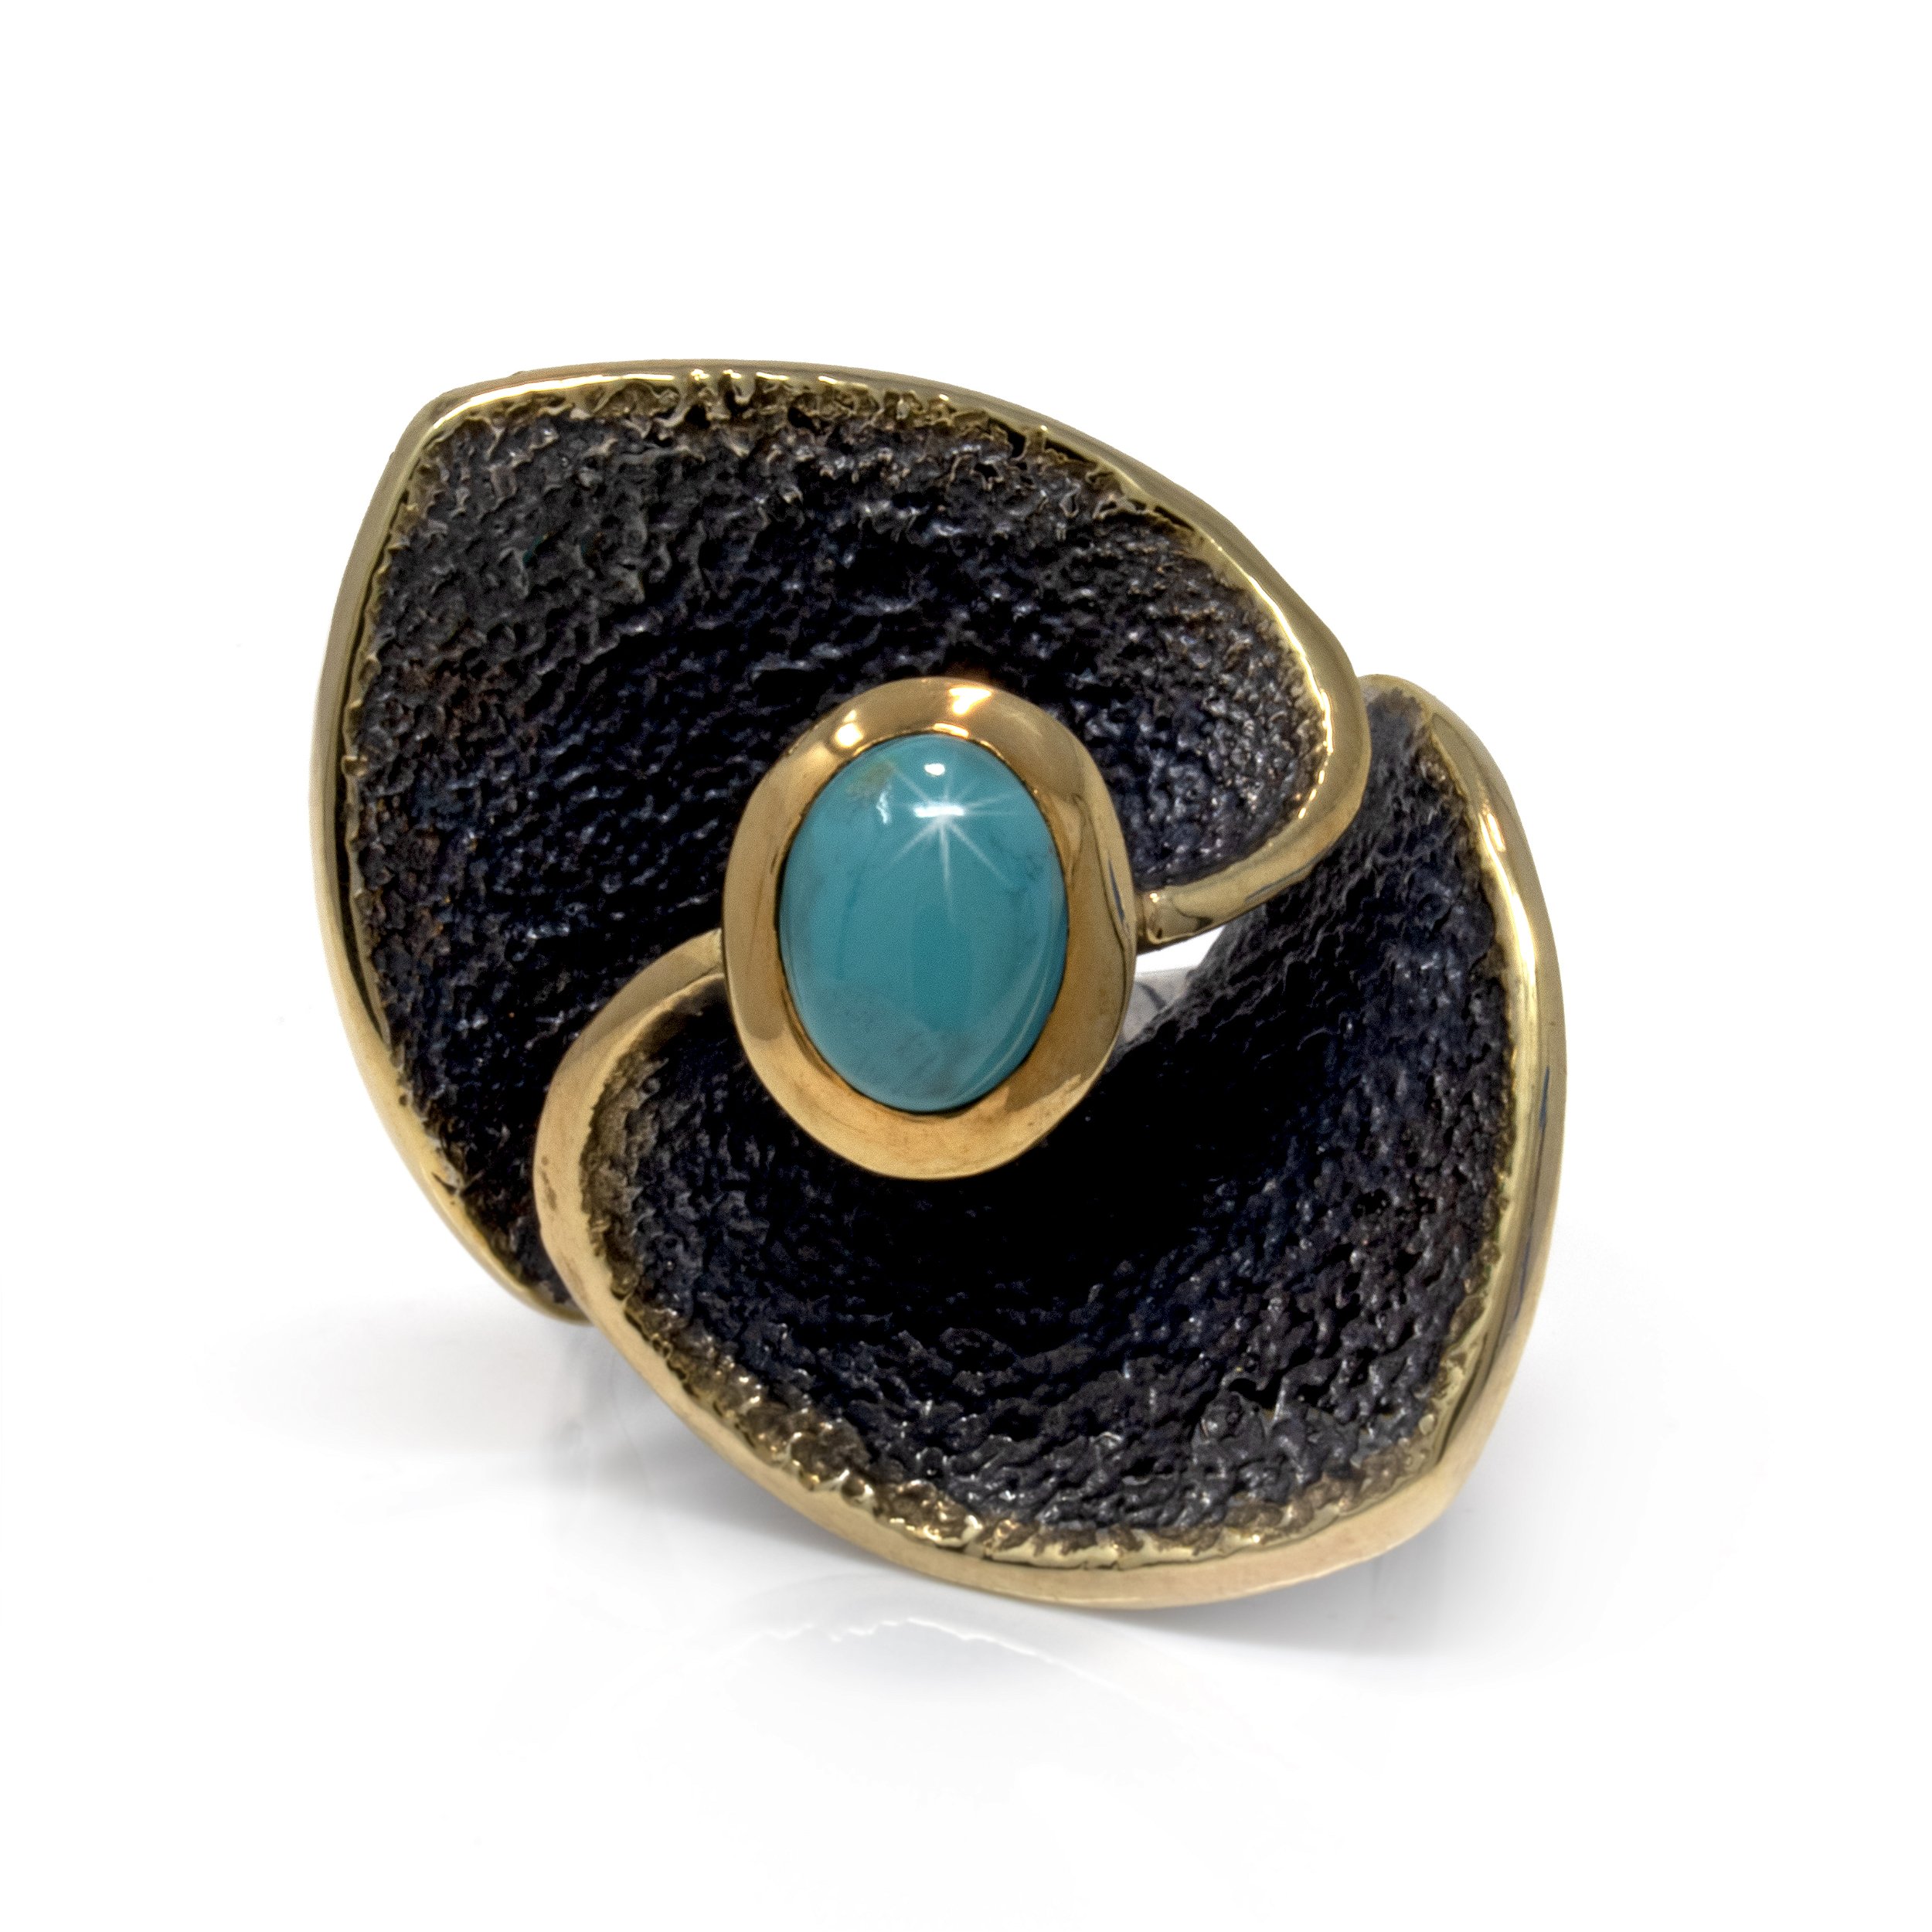 New Mexico (Campositos) Turquoise Ring - Oval Cabochon Set On Textured Oxidized Sterling Silver Flower Petal Band Top With Gold Vermeil Accents Size 9.5